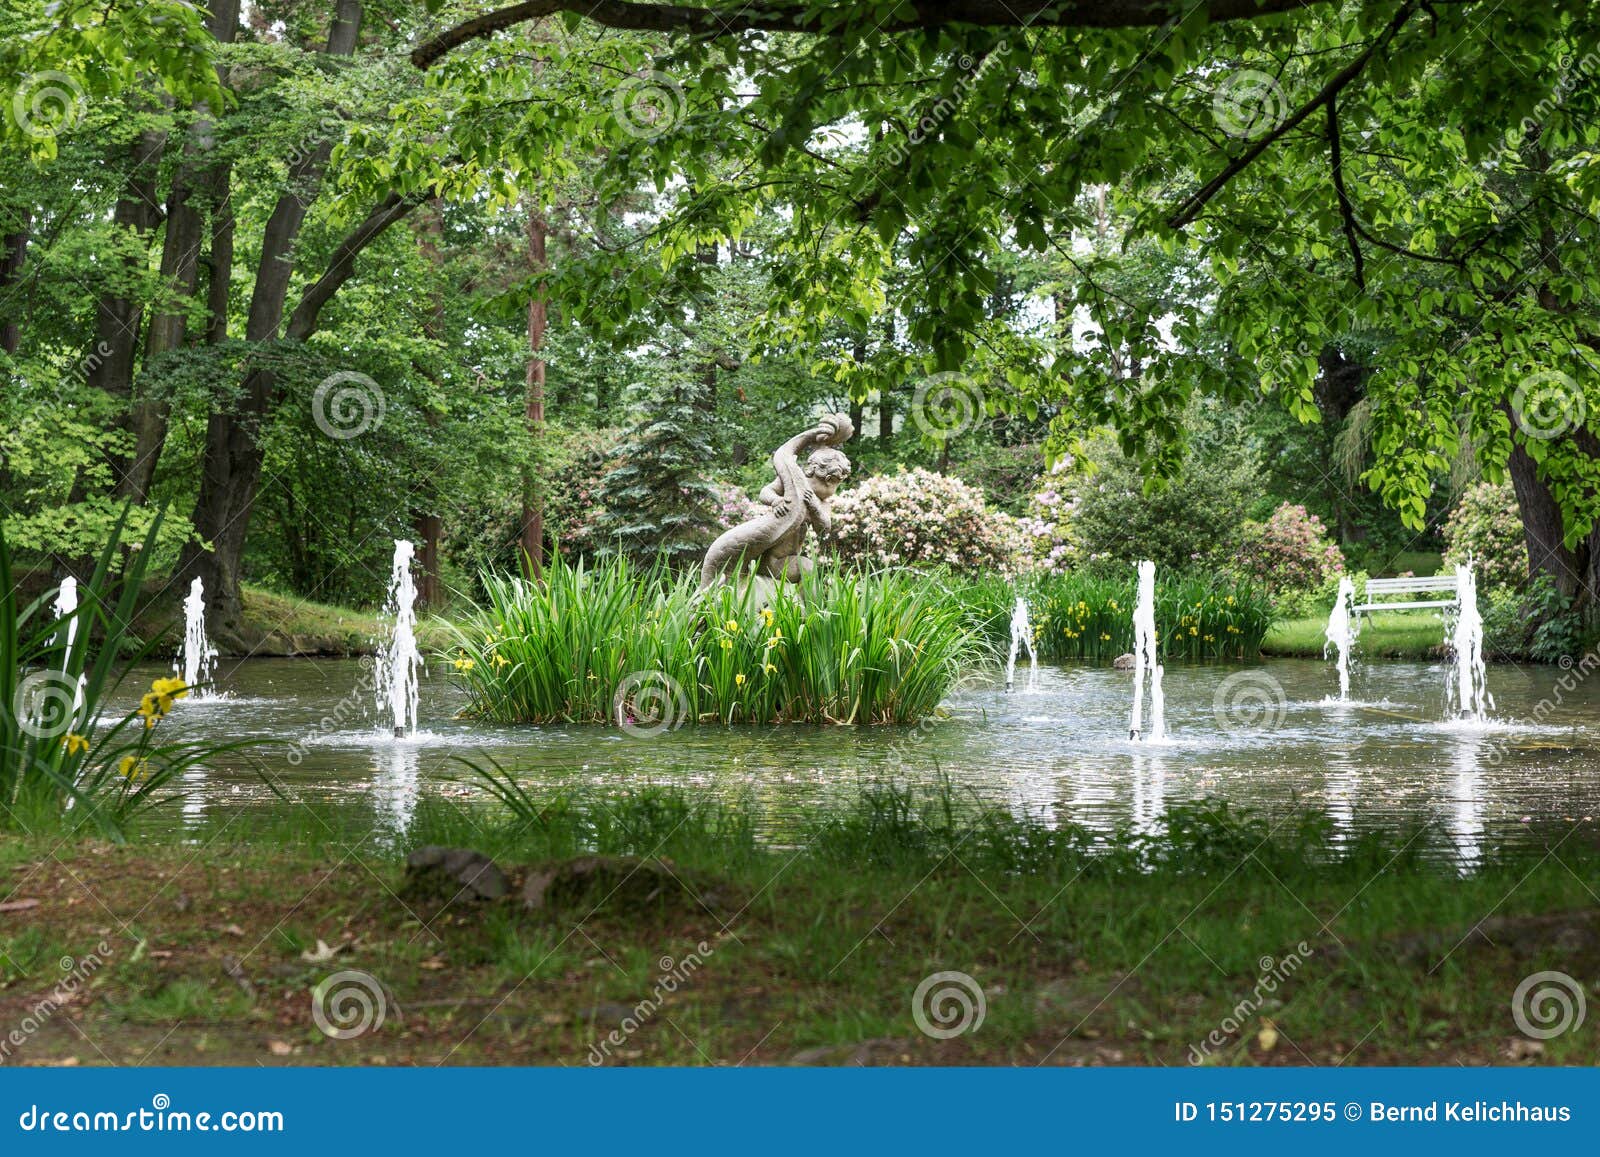 Fountain and Sculpture in City Park Stock Image - Image of water ...